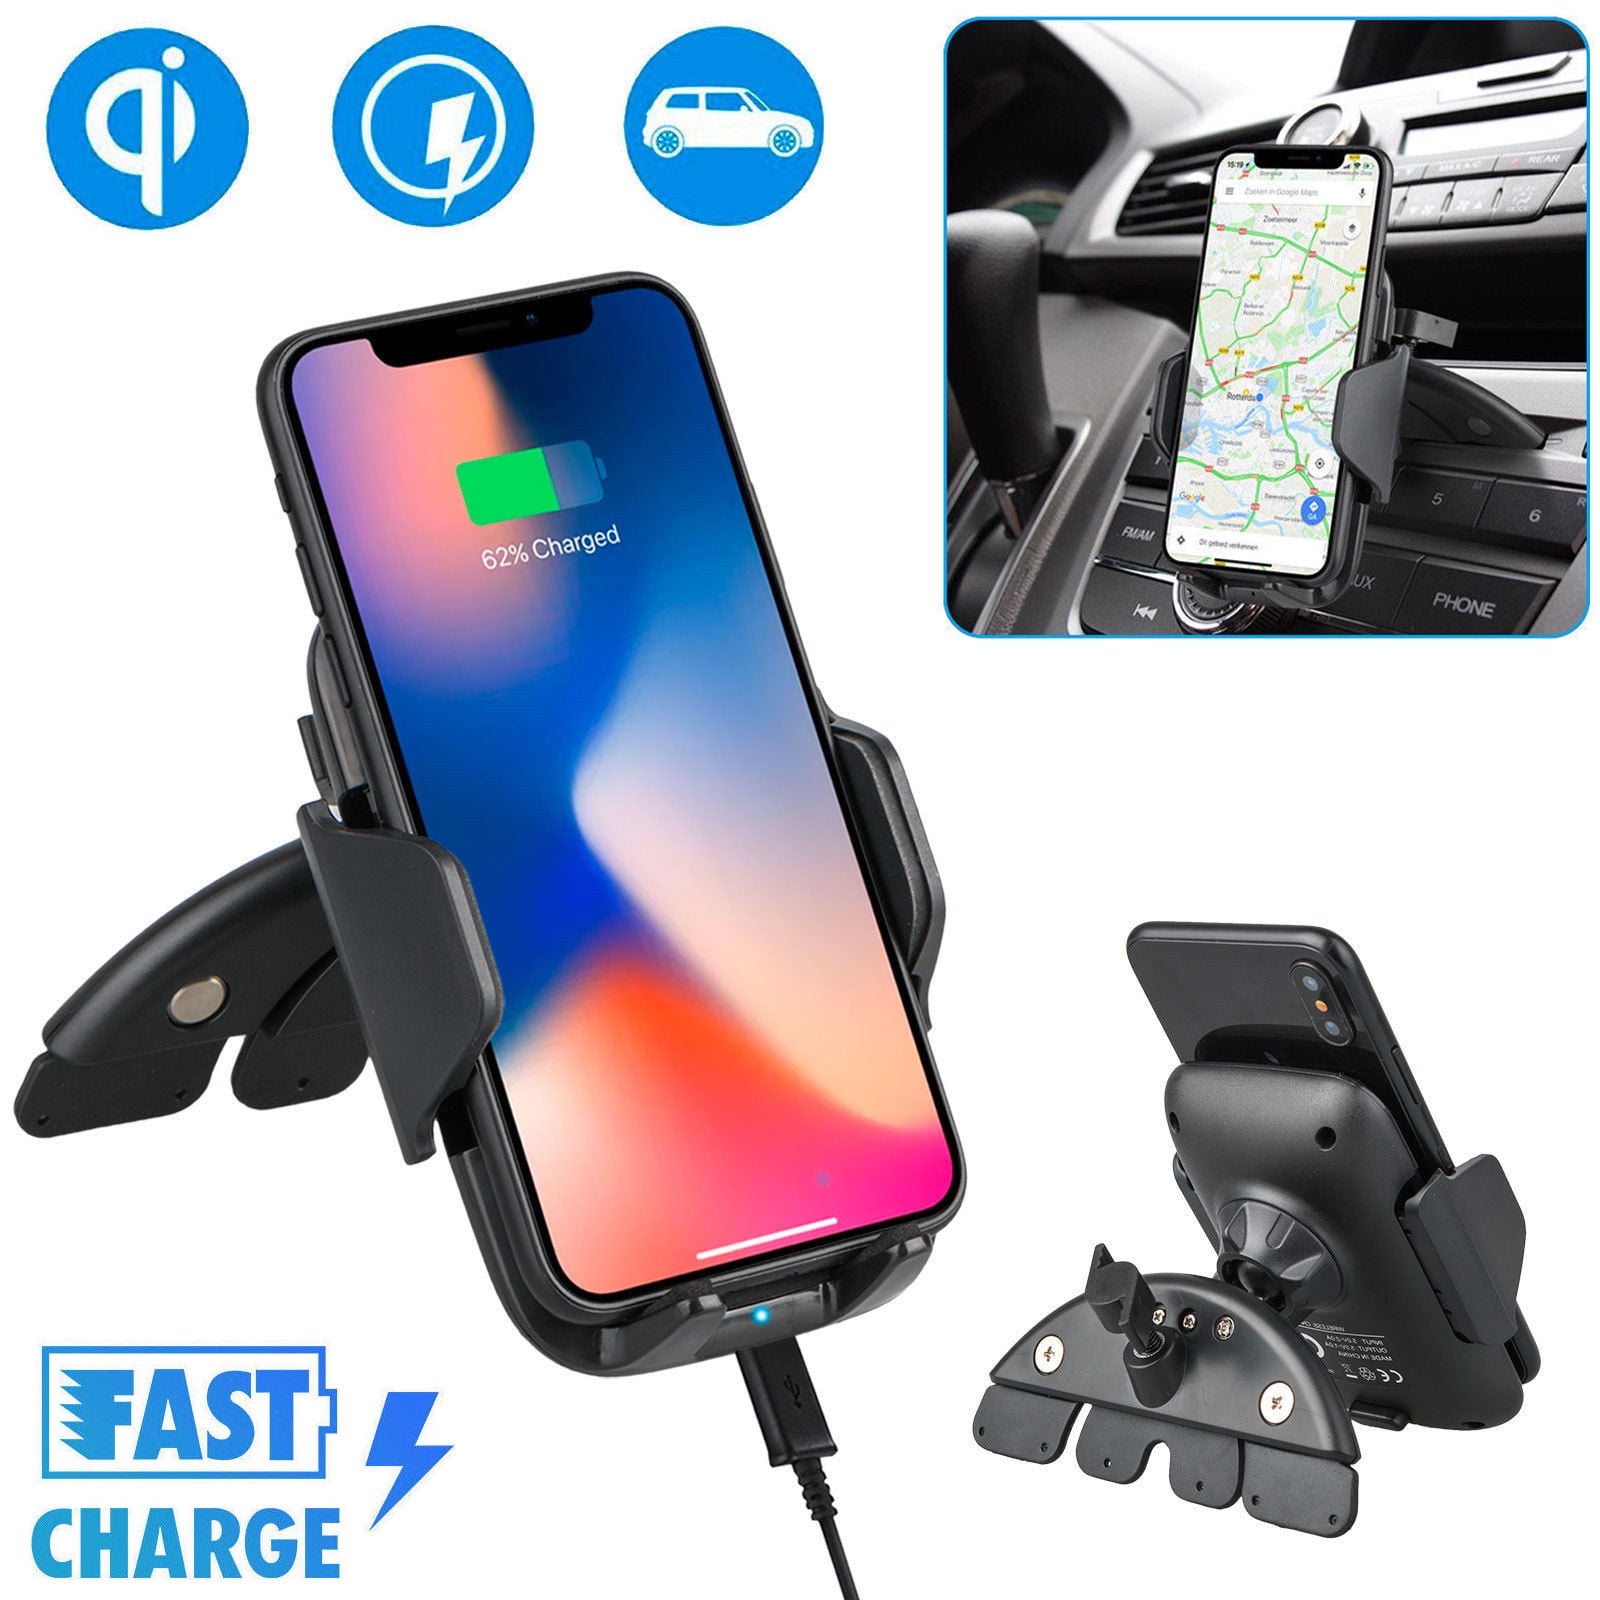 ​Qi Charger for Samsung Galaxy S10 Plus S9 S8 Note 10 iPhone 11 leChivée Car Phone Holder Mount Wireless Car Charger CD Mount Universal Cell Phone Holder for Car Auto Clamping CD Slot and Air Vent 